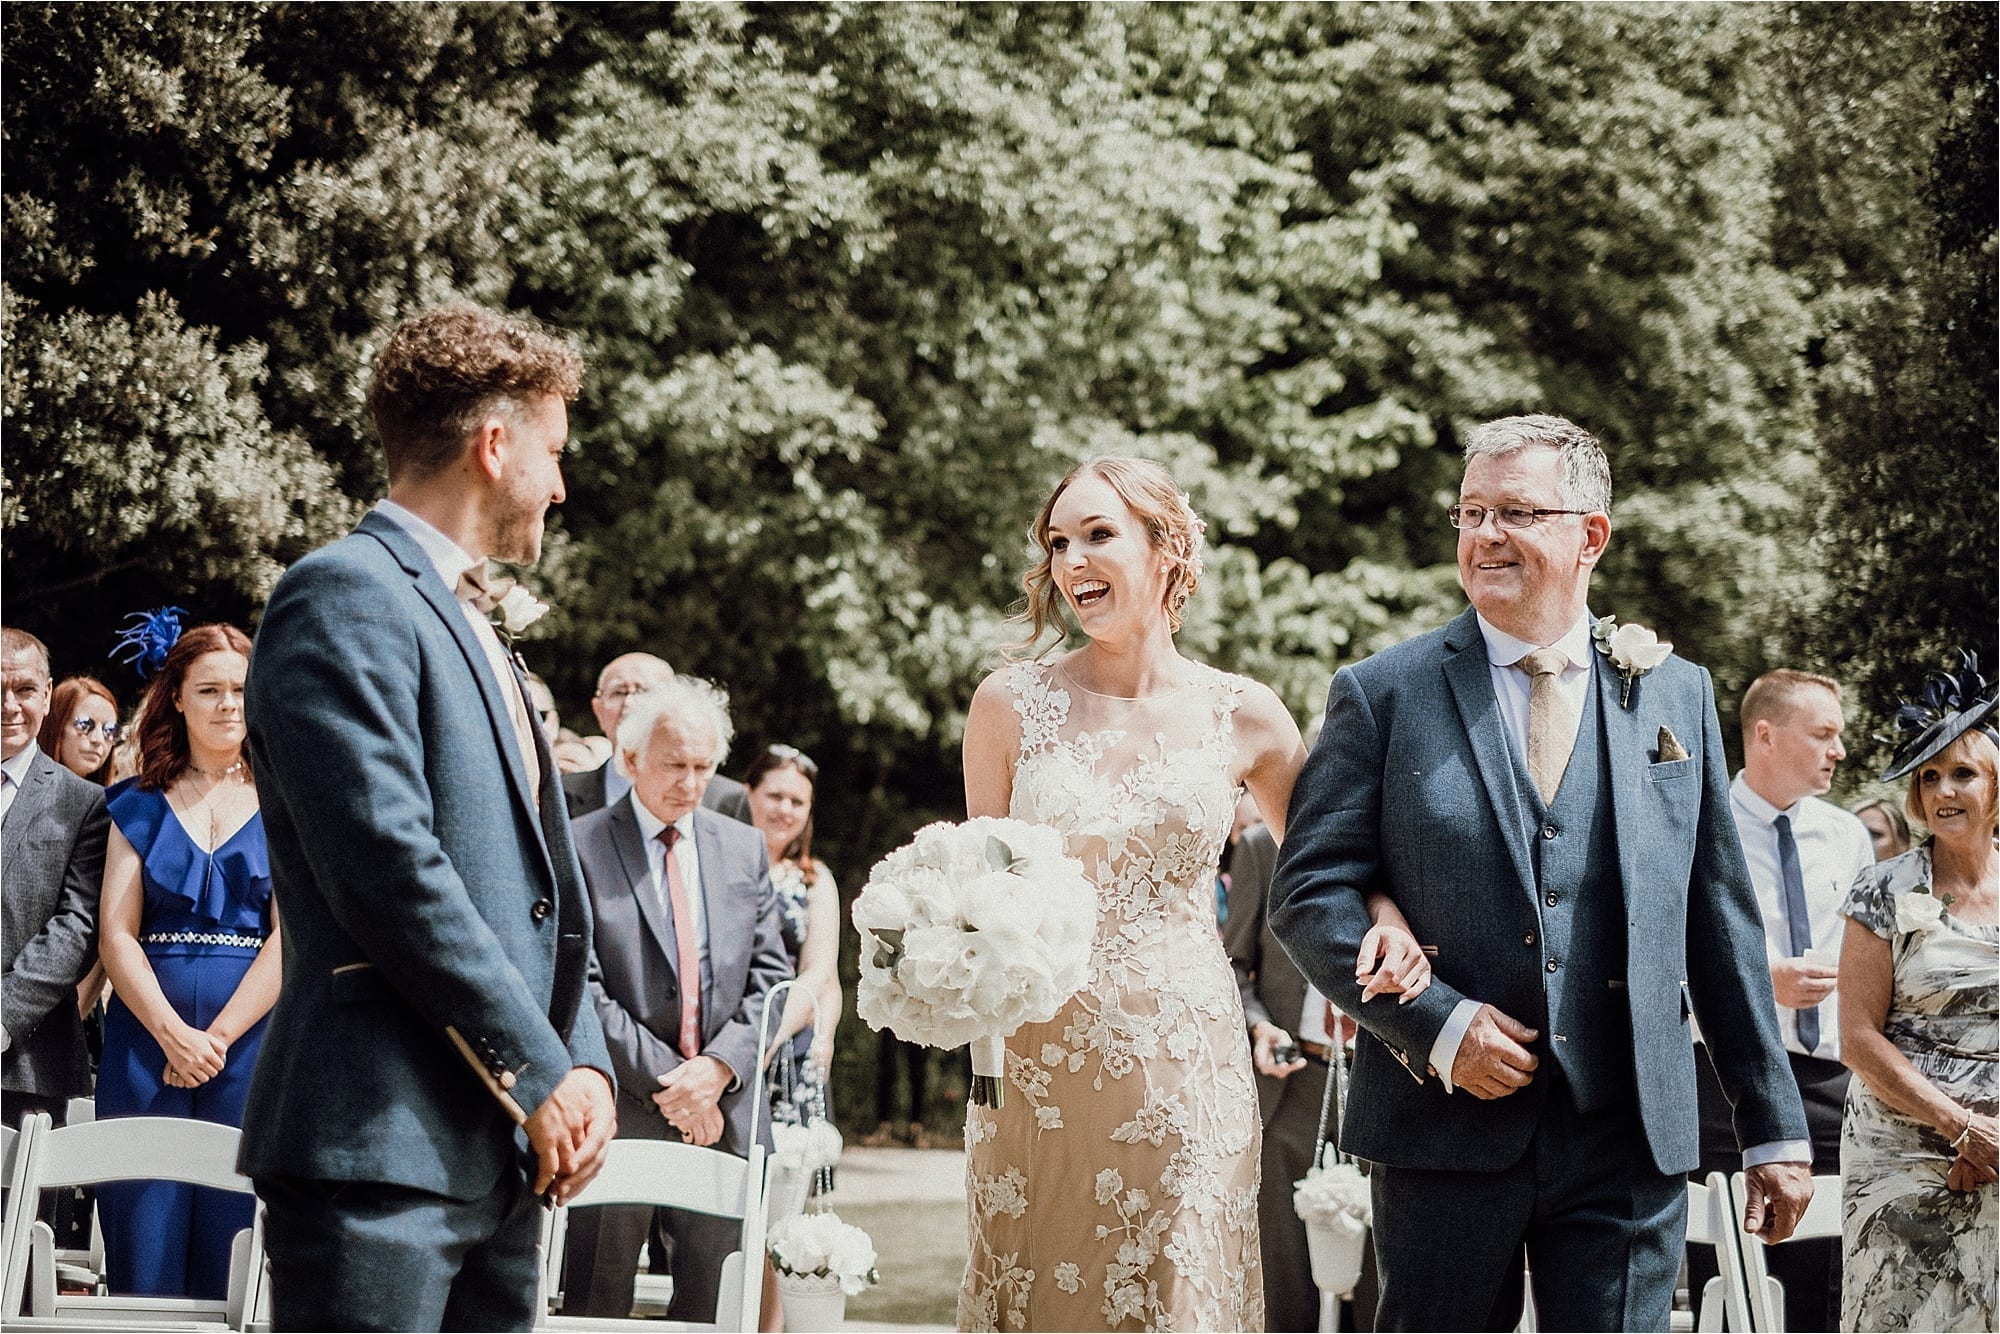 Outdoor Country wedding at Kitley